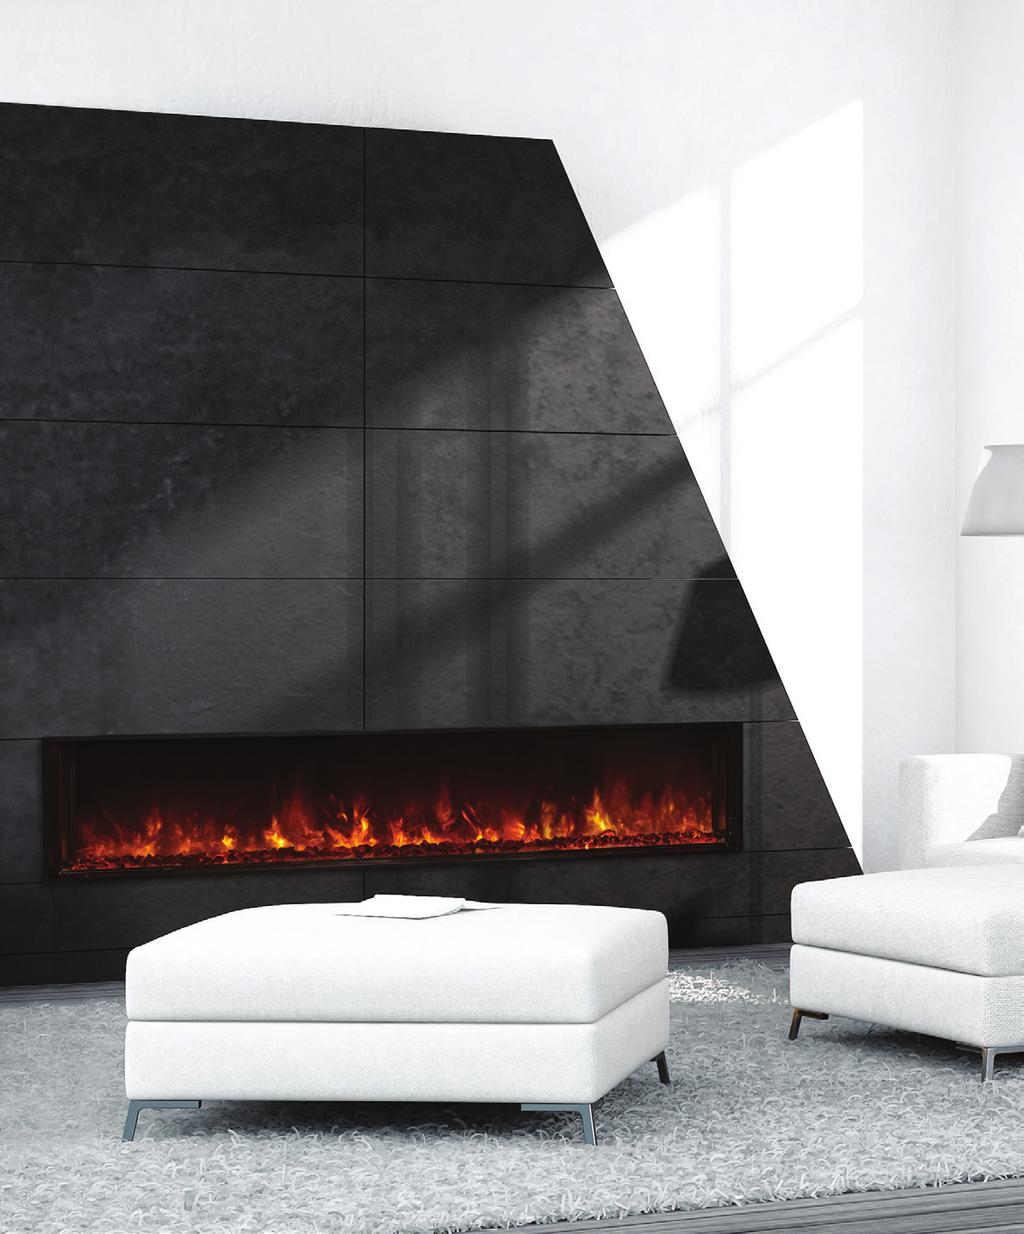 LFV1000/400-AU Landscape FullView Built-in flush mount The Landscape FullView built-in electric fireplace is the first of its kind creating